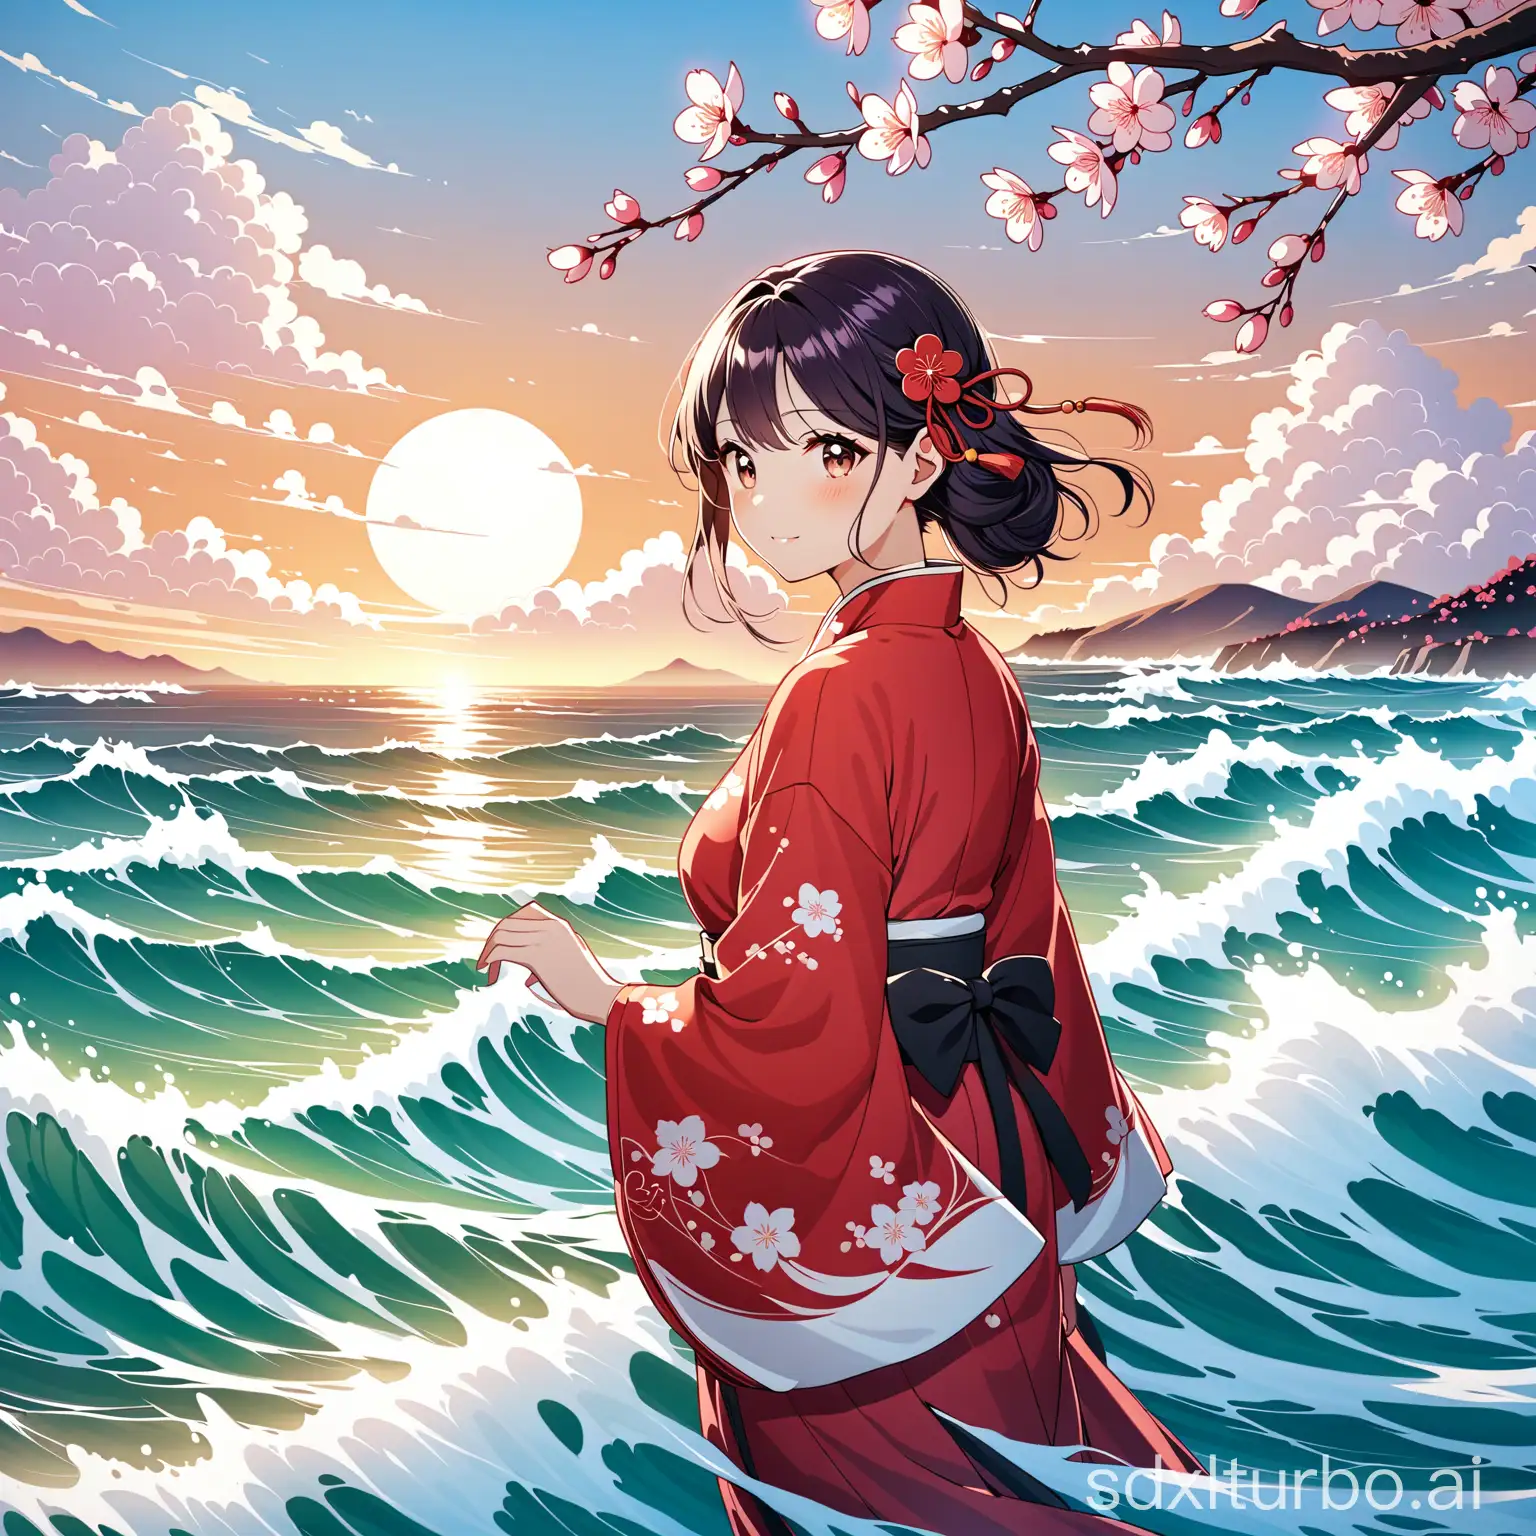 Plum blossoms, white clouds, waves, gentle girl